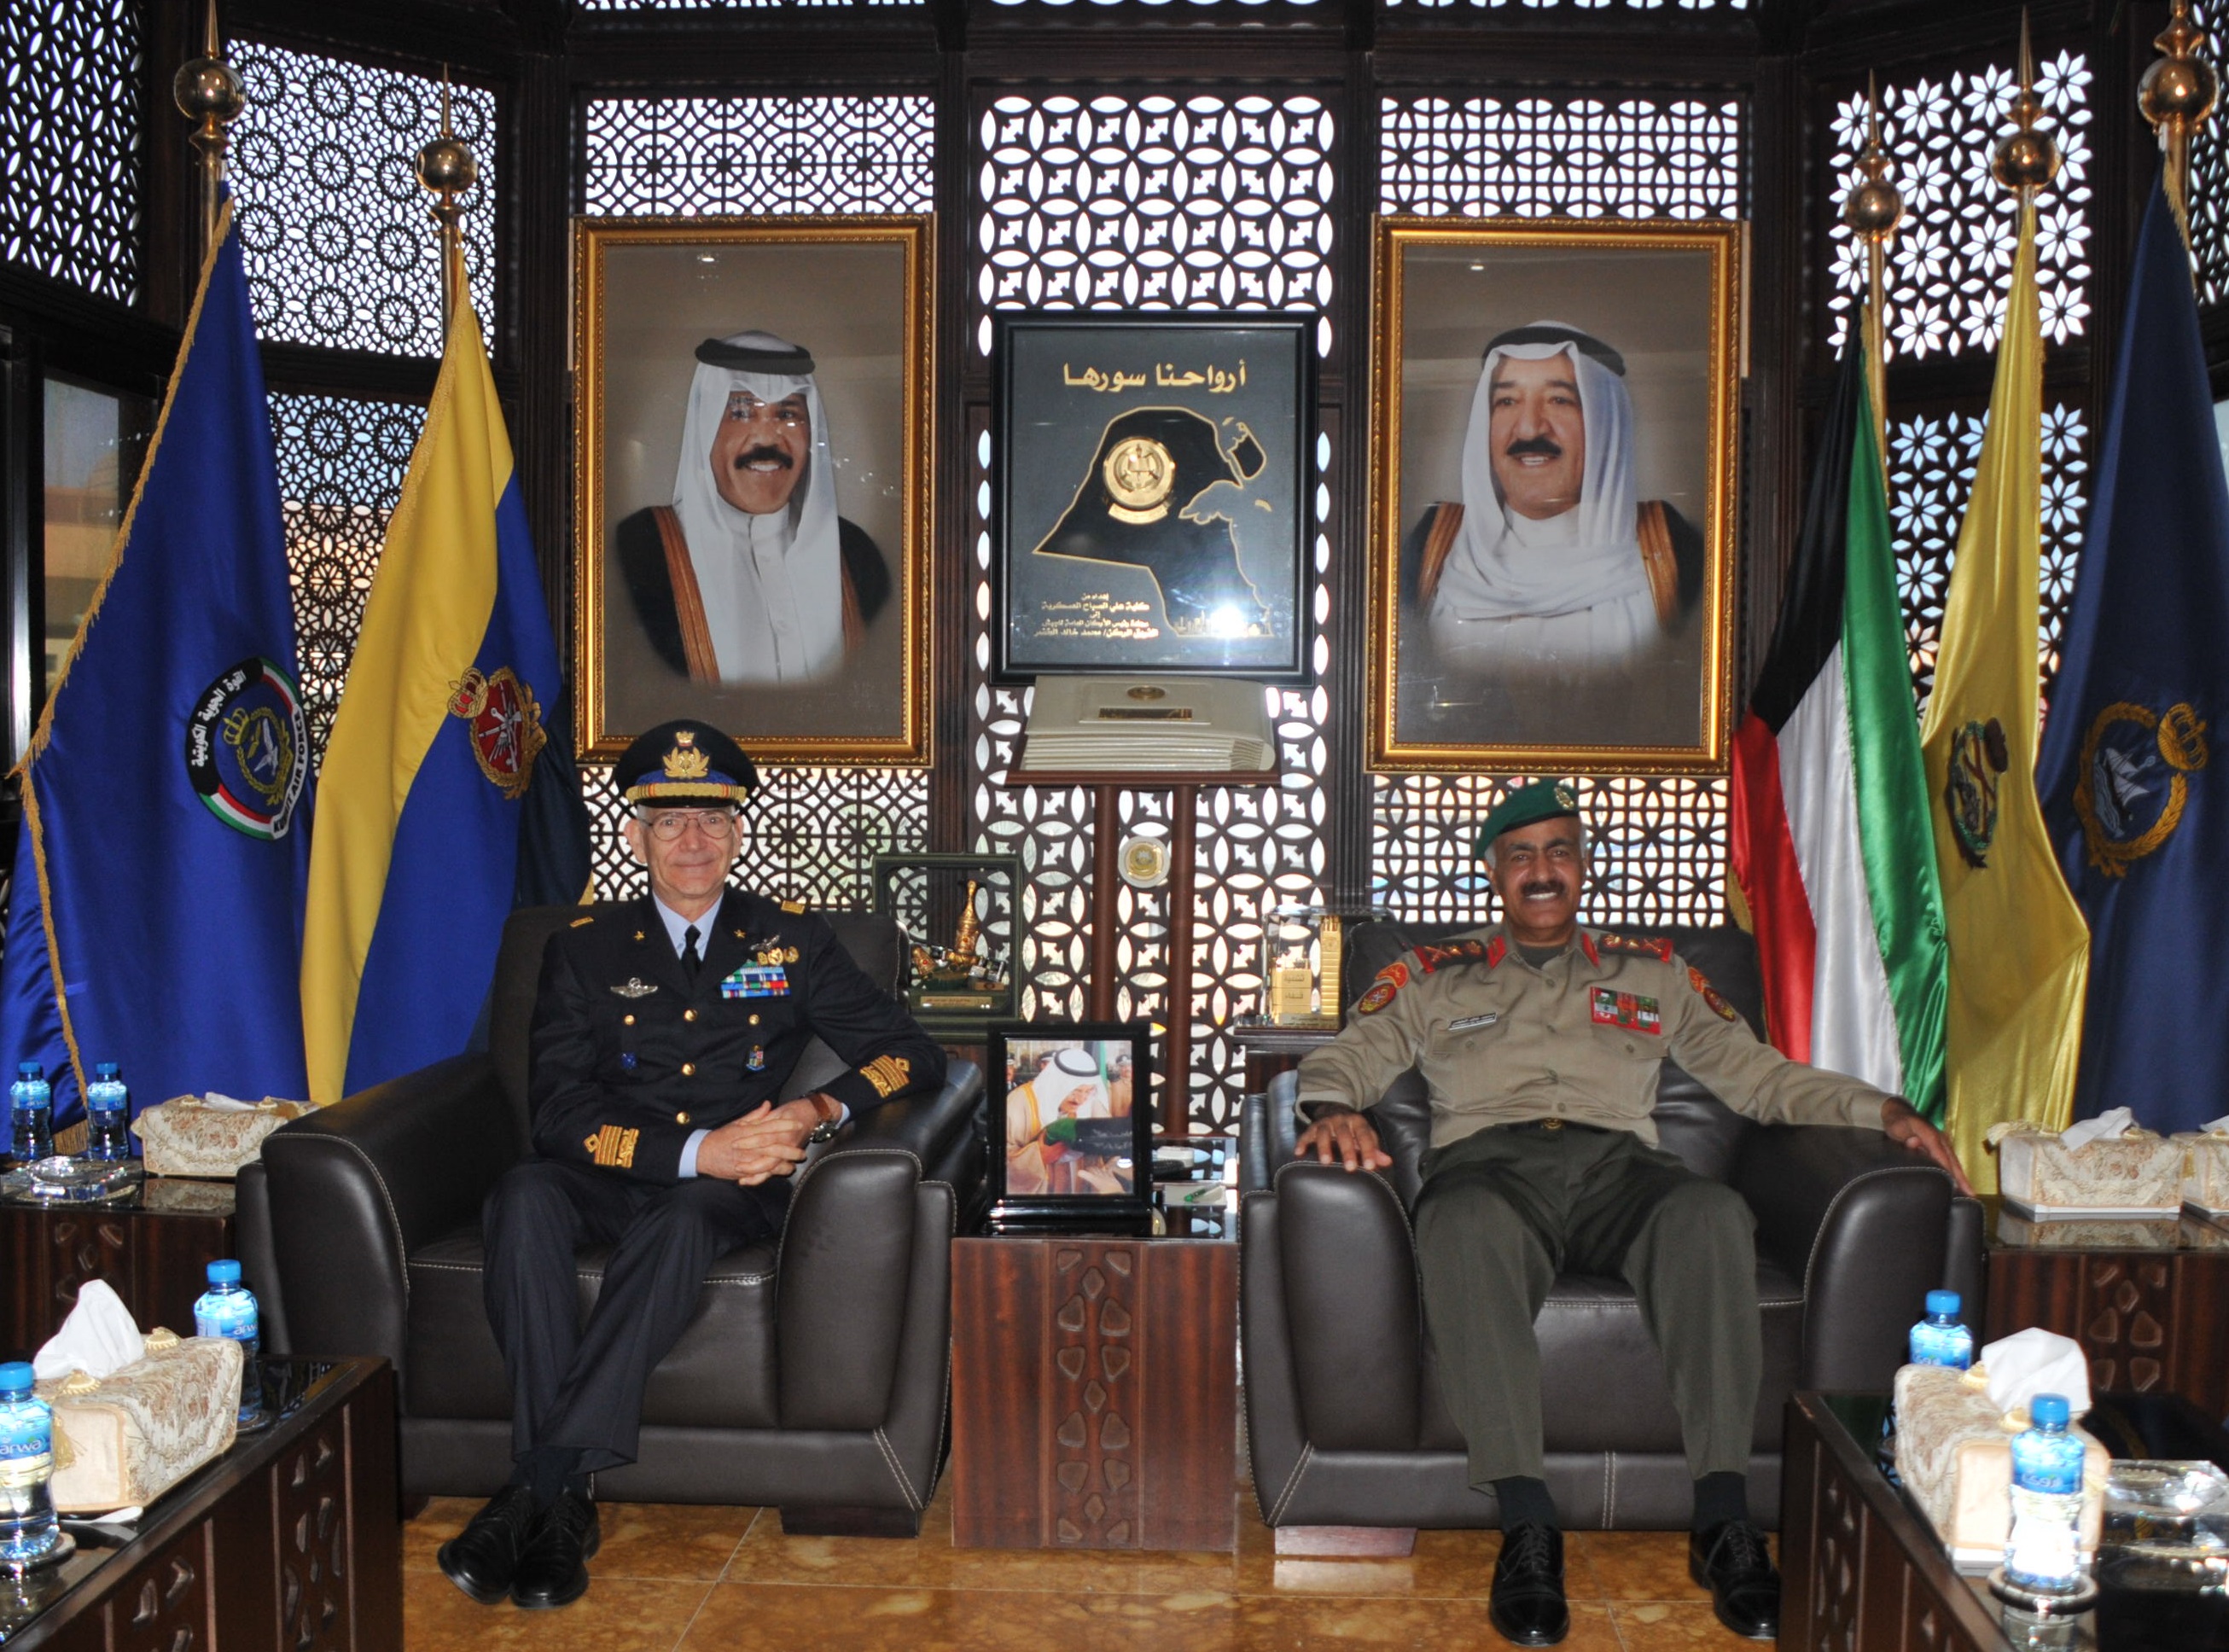 Chief of the Kuwaiti Army's General Staff Lieut. Gen. Mohammad Al-Khodr and visiting Chief of Staff of the Italian Air Force Gen. Alberto Rosso